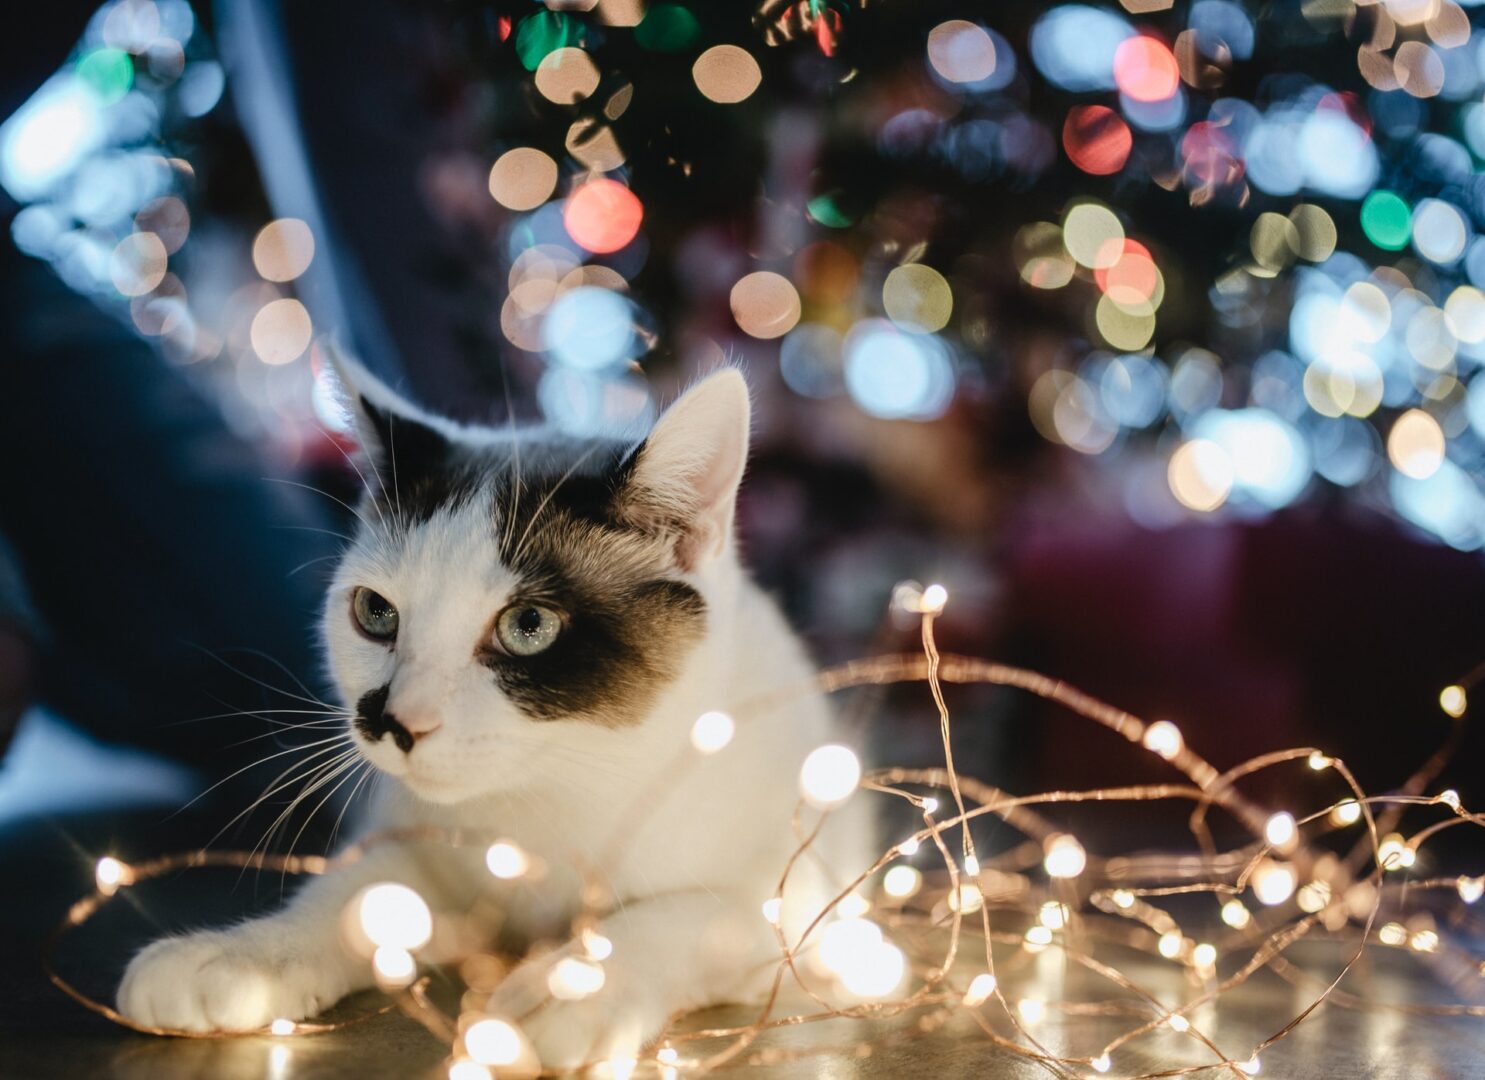 Cat wrapped in festive holiday lights.